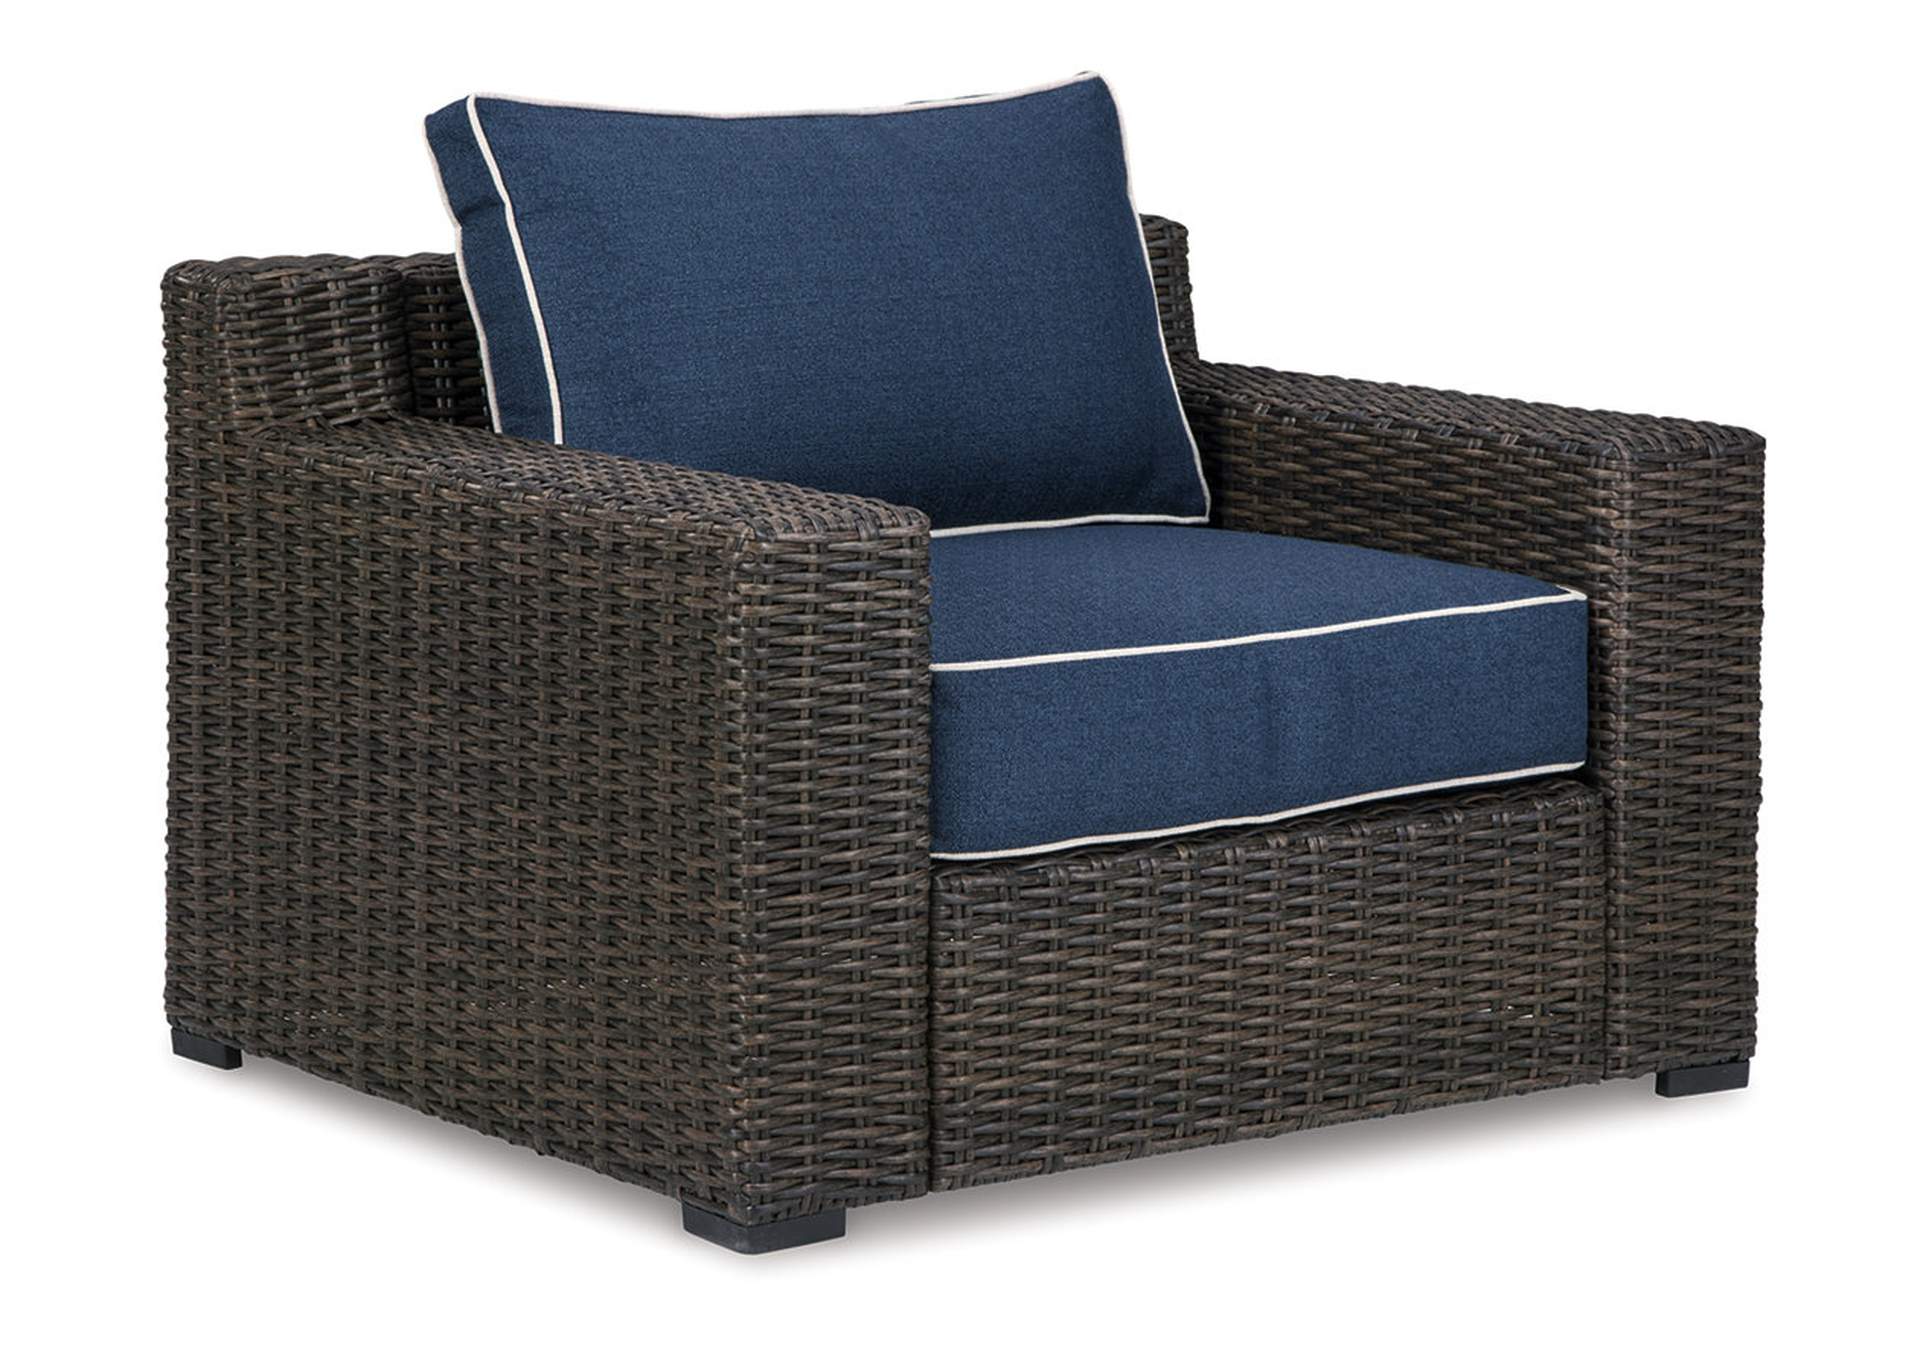 Grasson Lane Lounge Chair with Cushion,Outdoor By Ashley